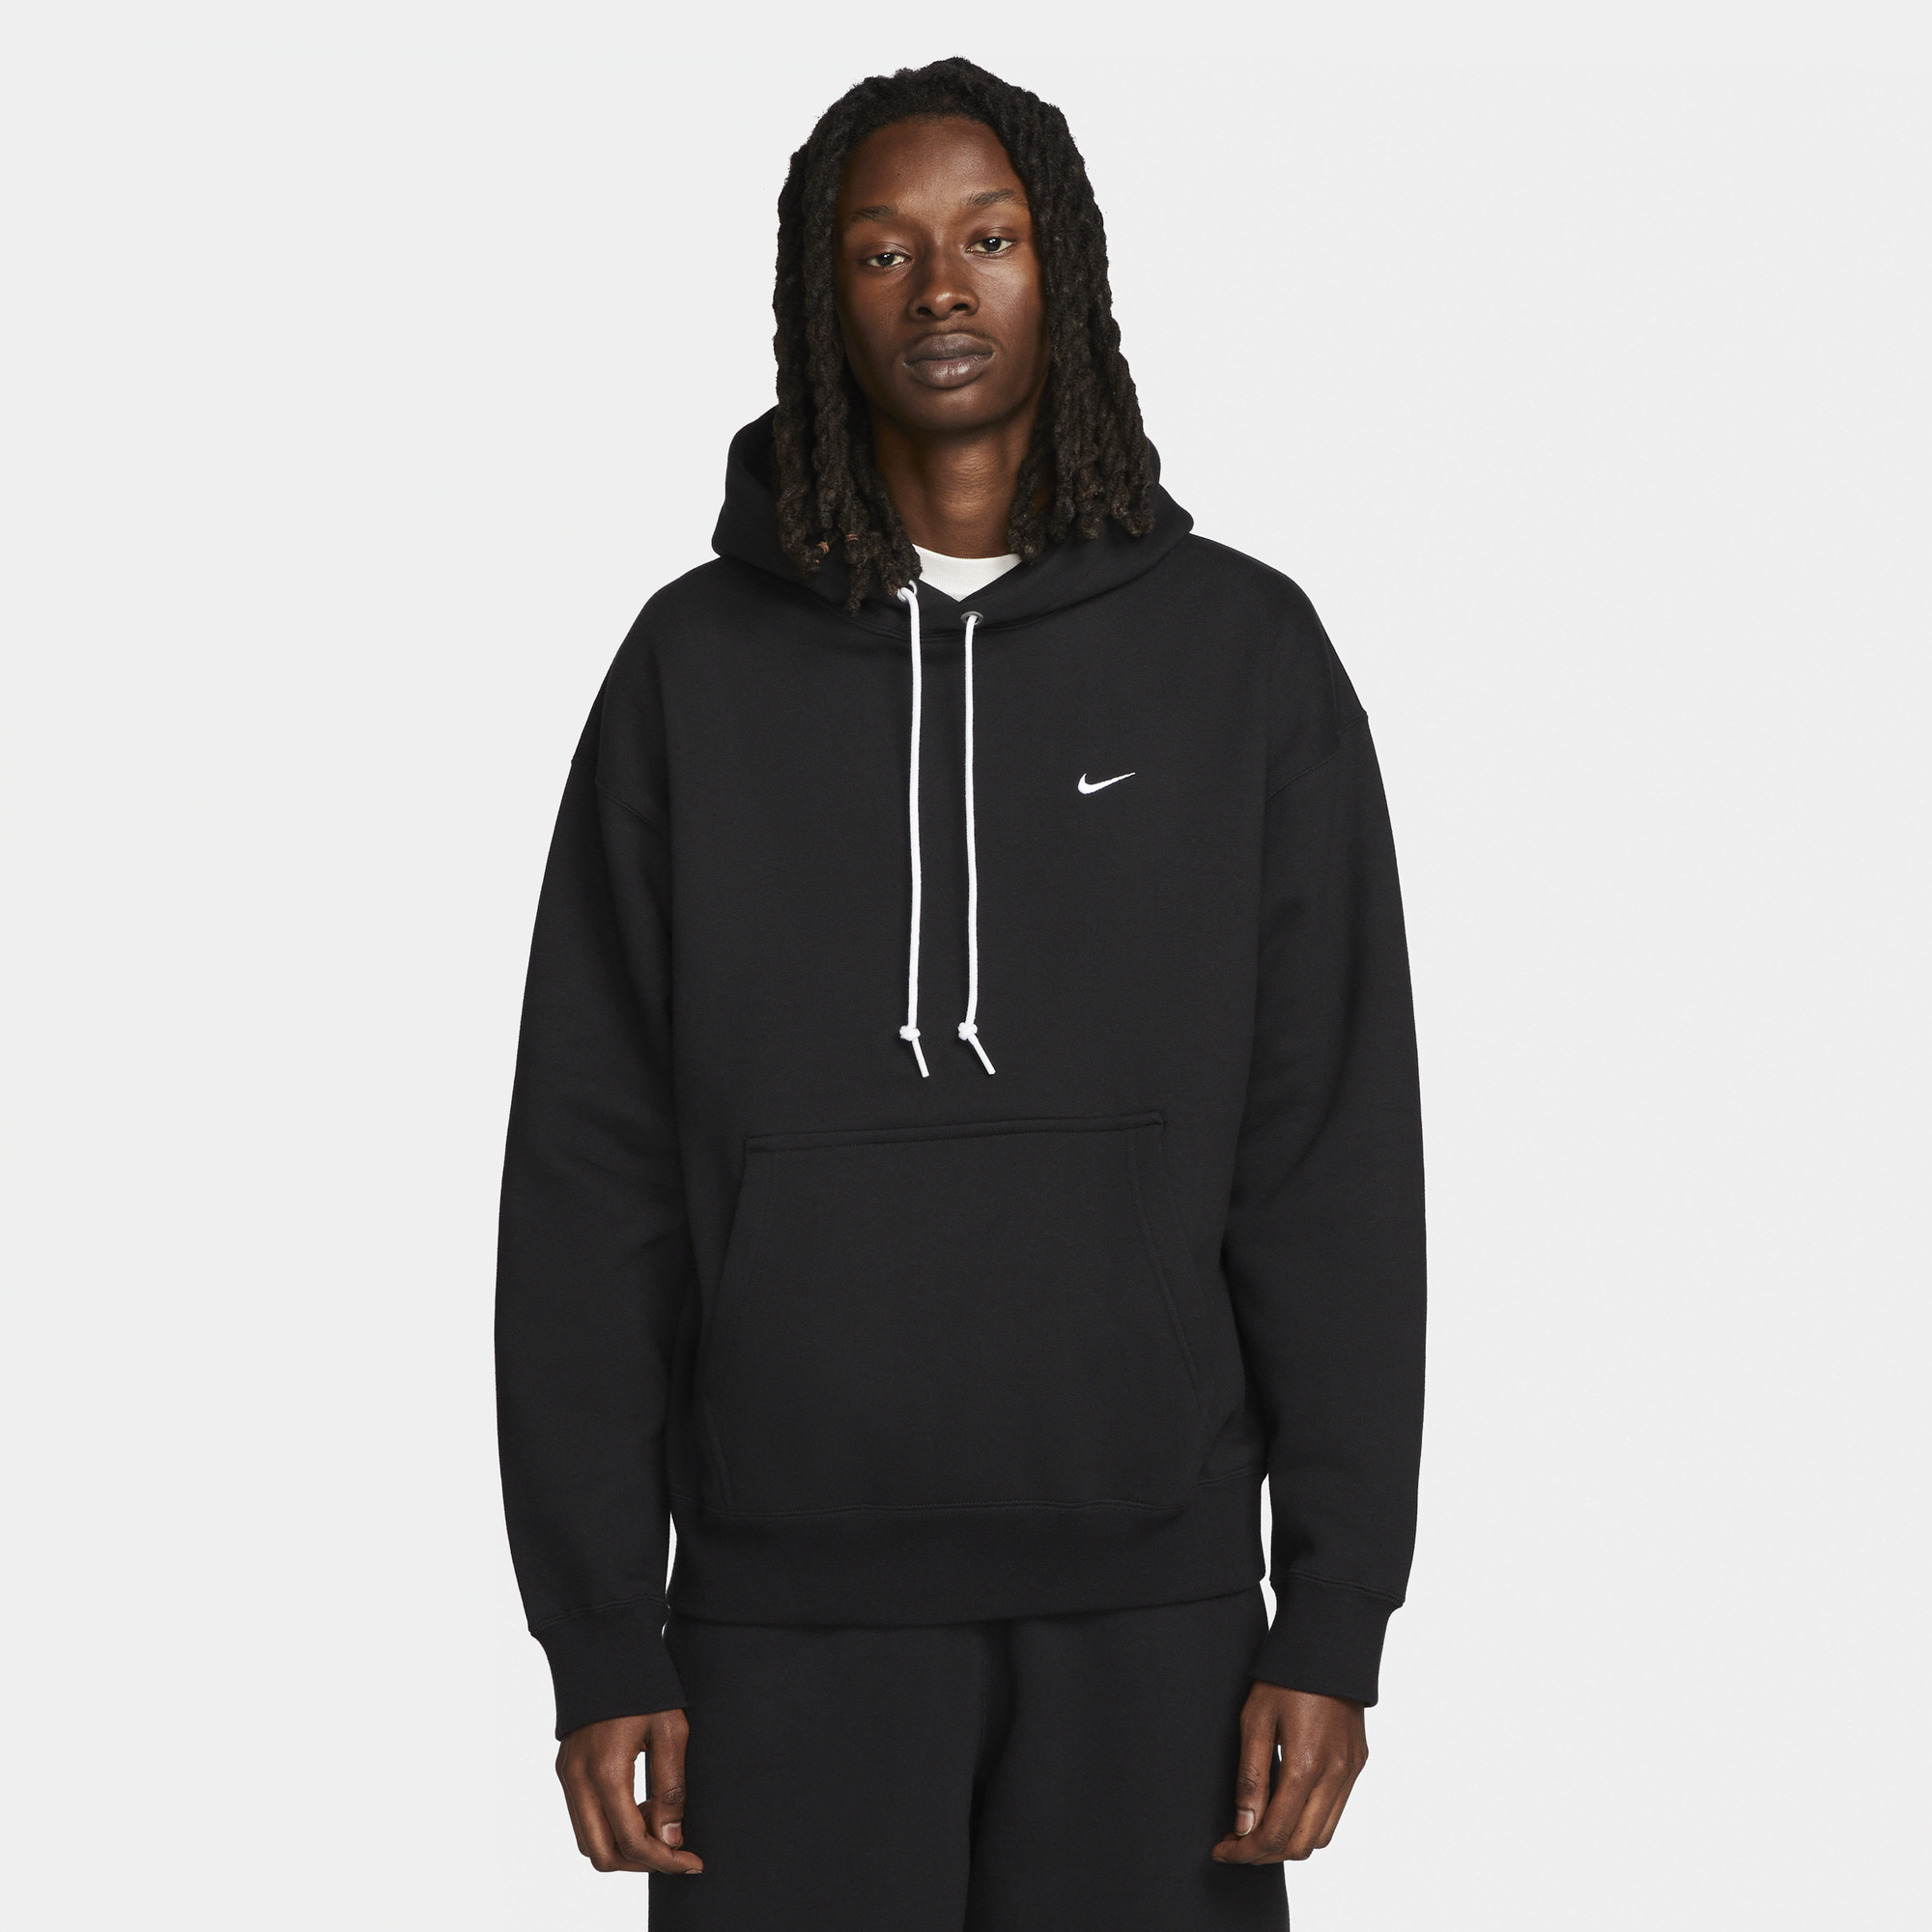 Discover the Power of Style and Comfort with the Nike Tech Fleece